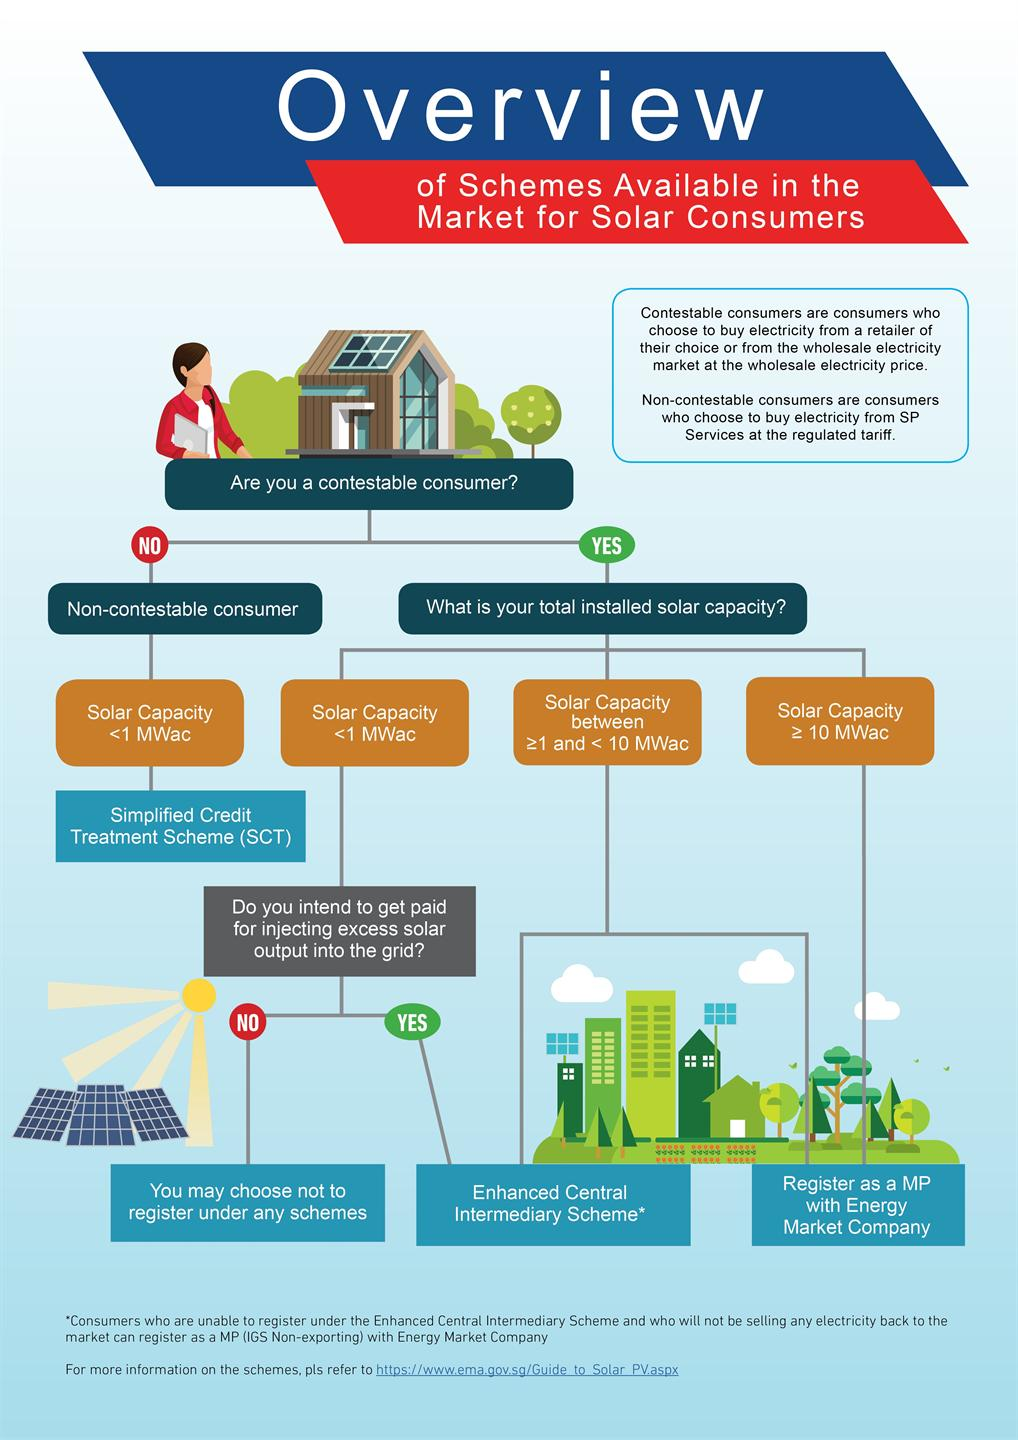 solar financial incentives in the market for solar consumers